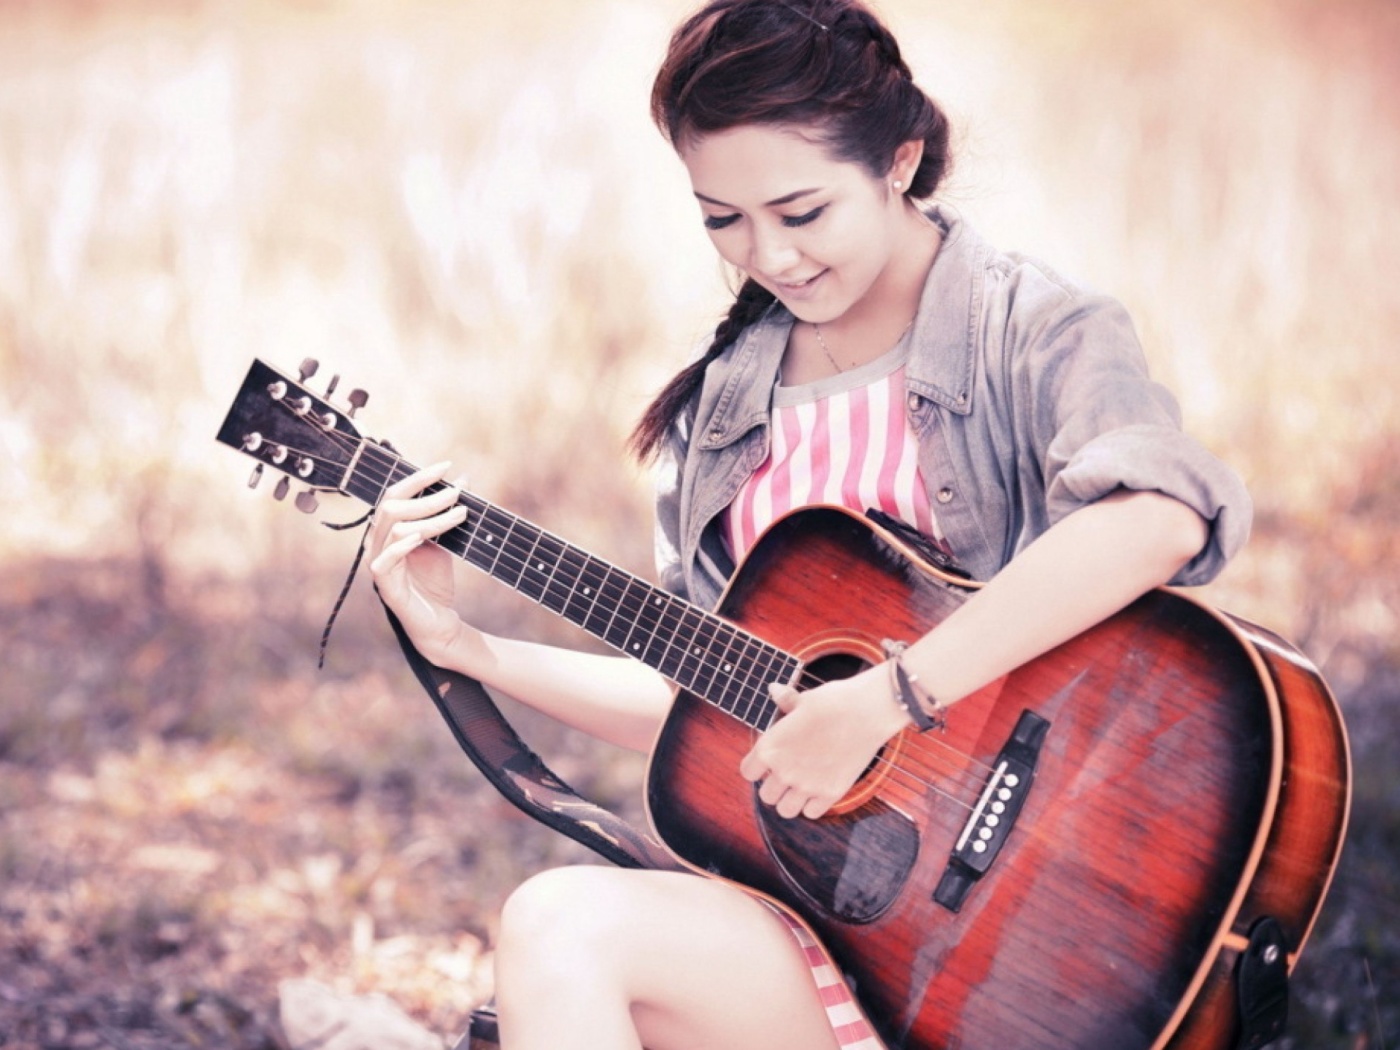 Das Chinese girl with guitar Wallpaper 1400x1050